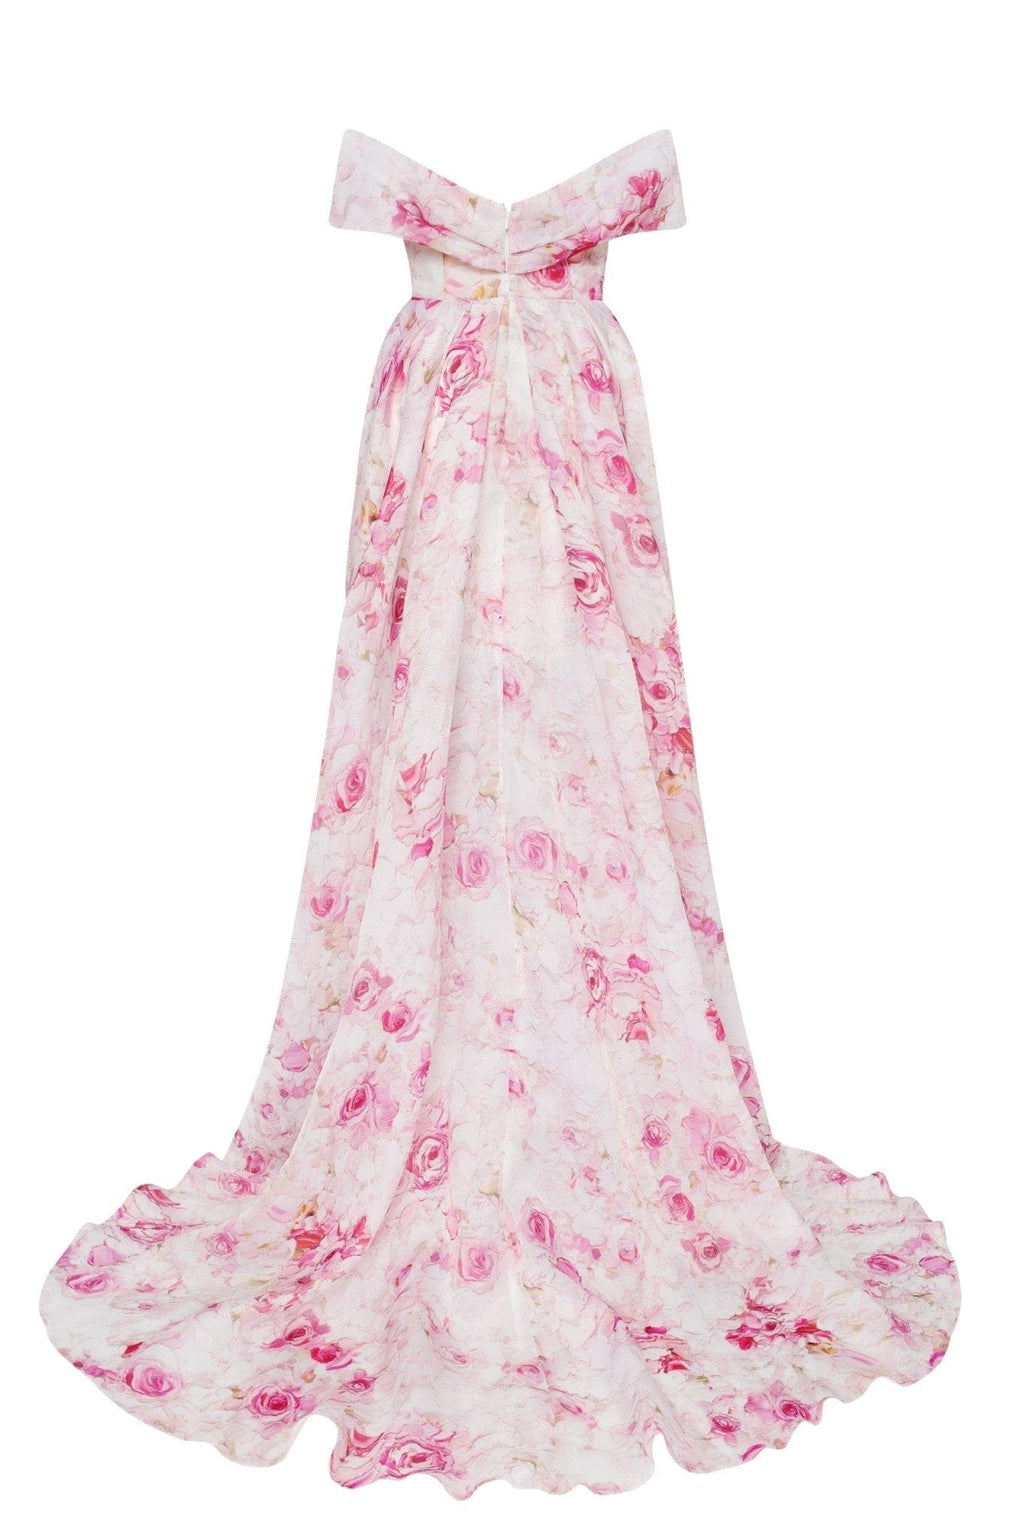 Pink Peony Chic off-the-shoulder floral maxi dress - Milla